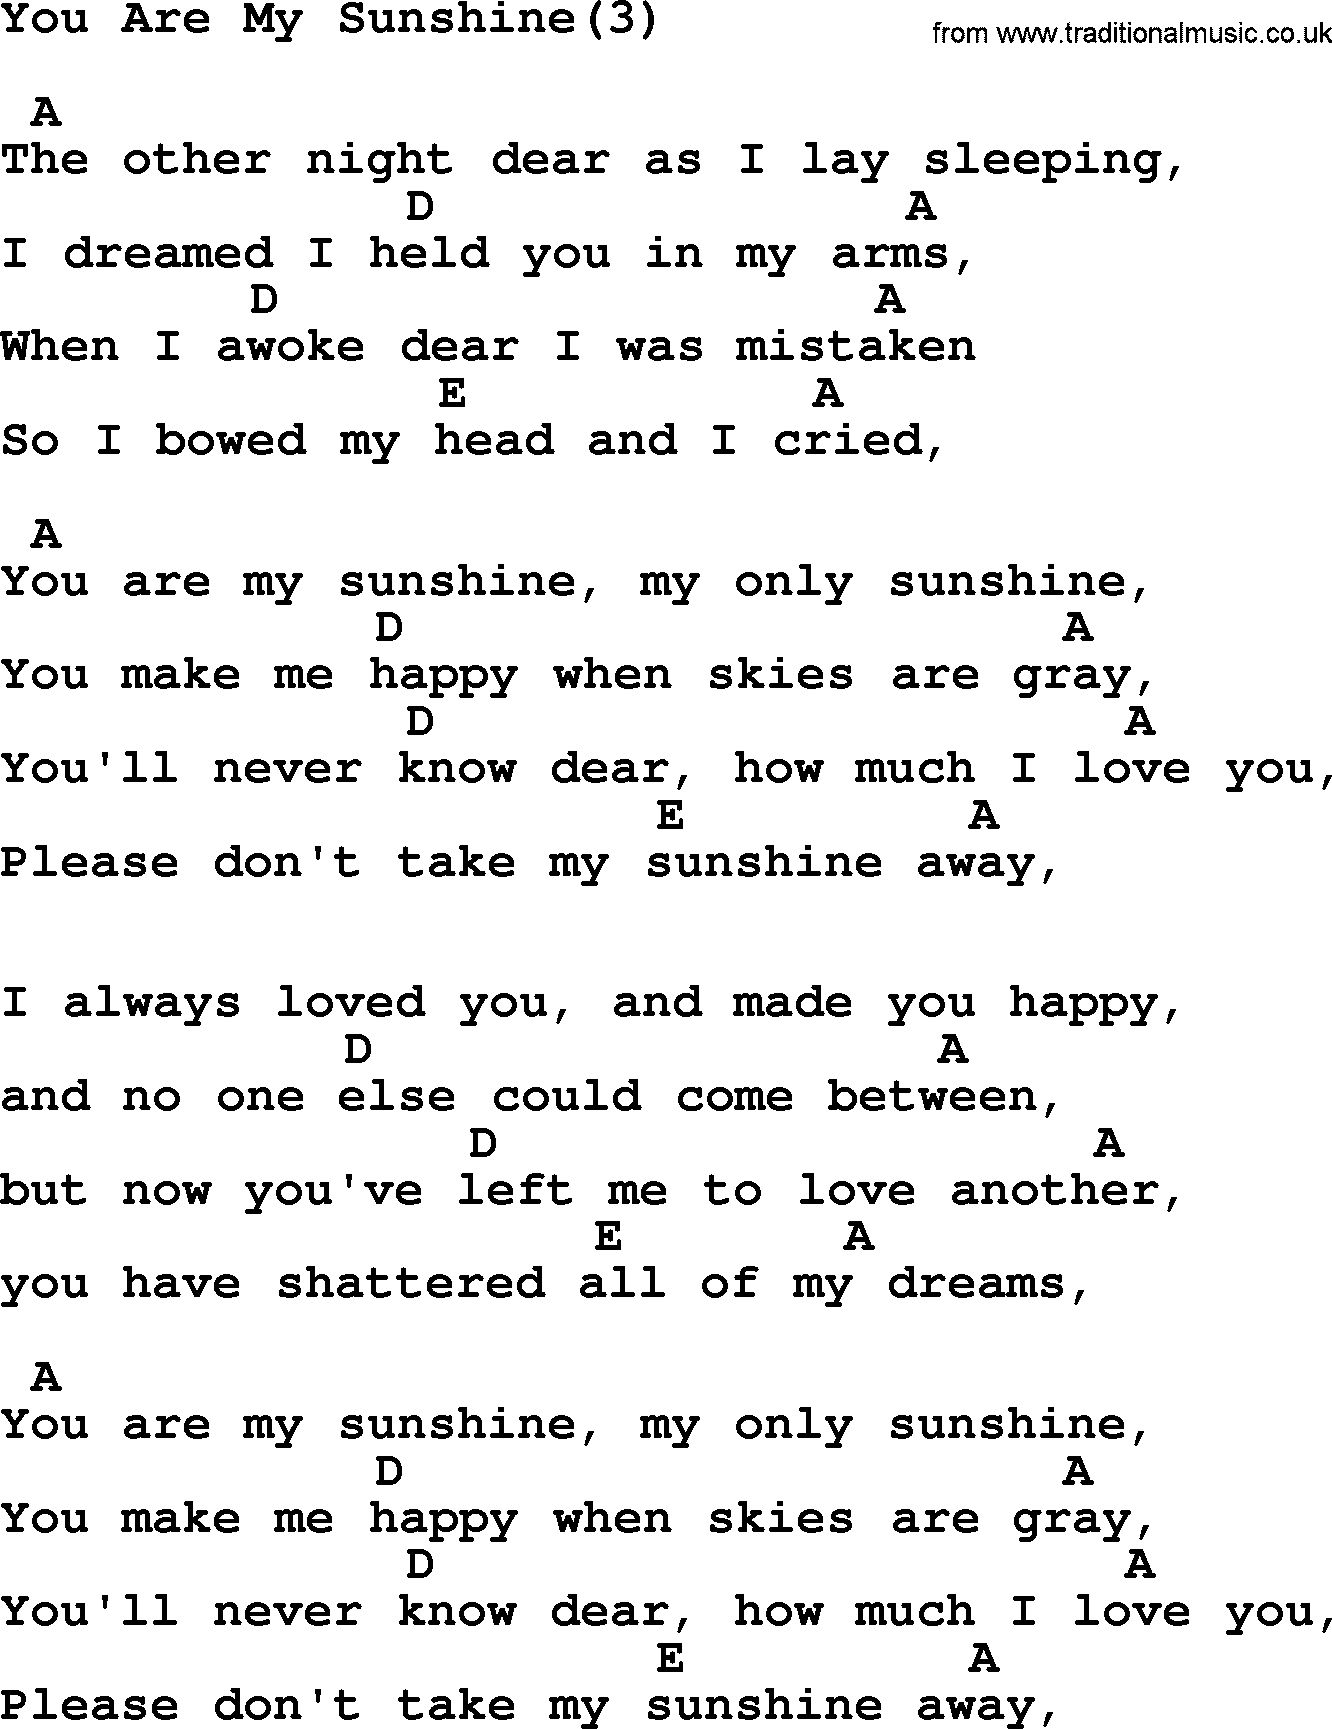 Johnny Cash song You Are My Sunshine(3), lyrics and chords